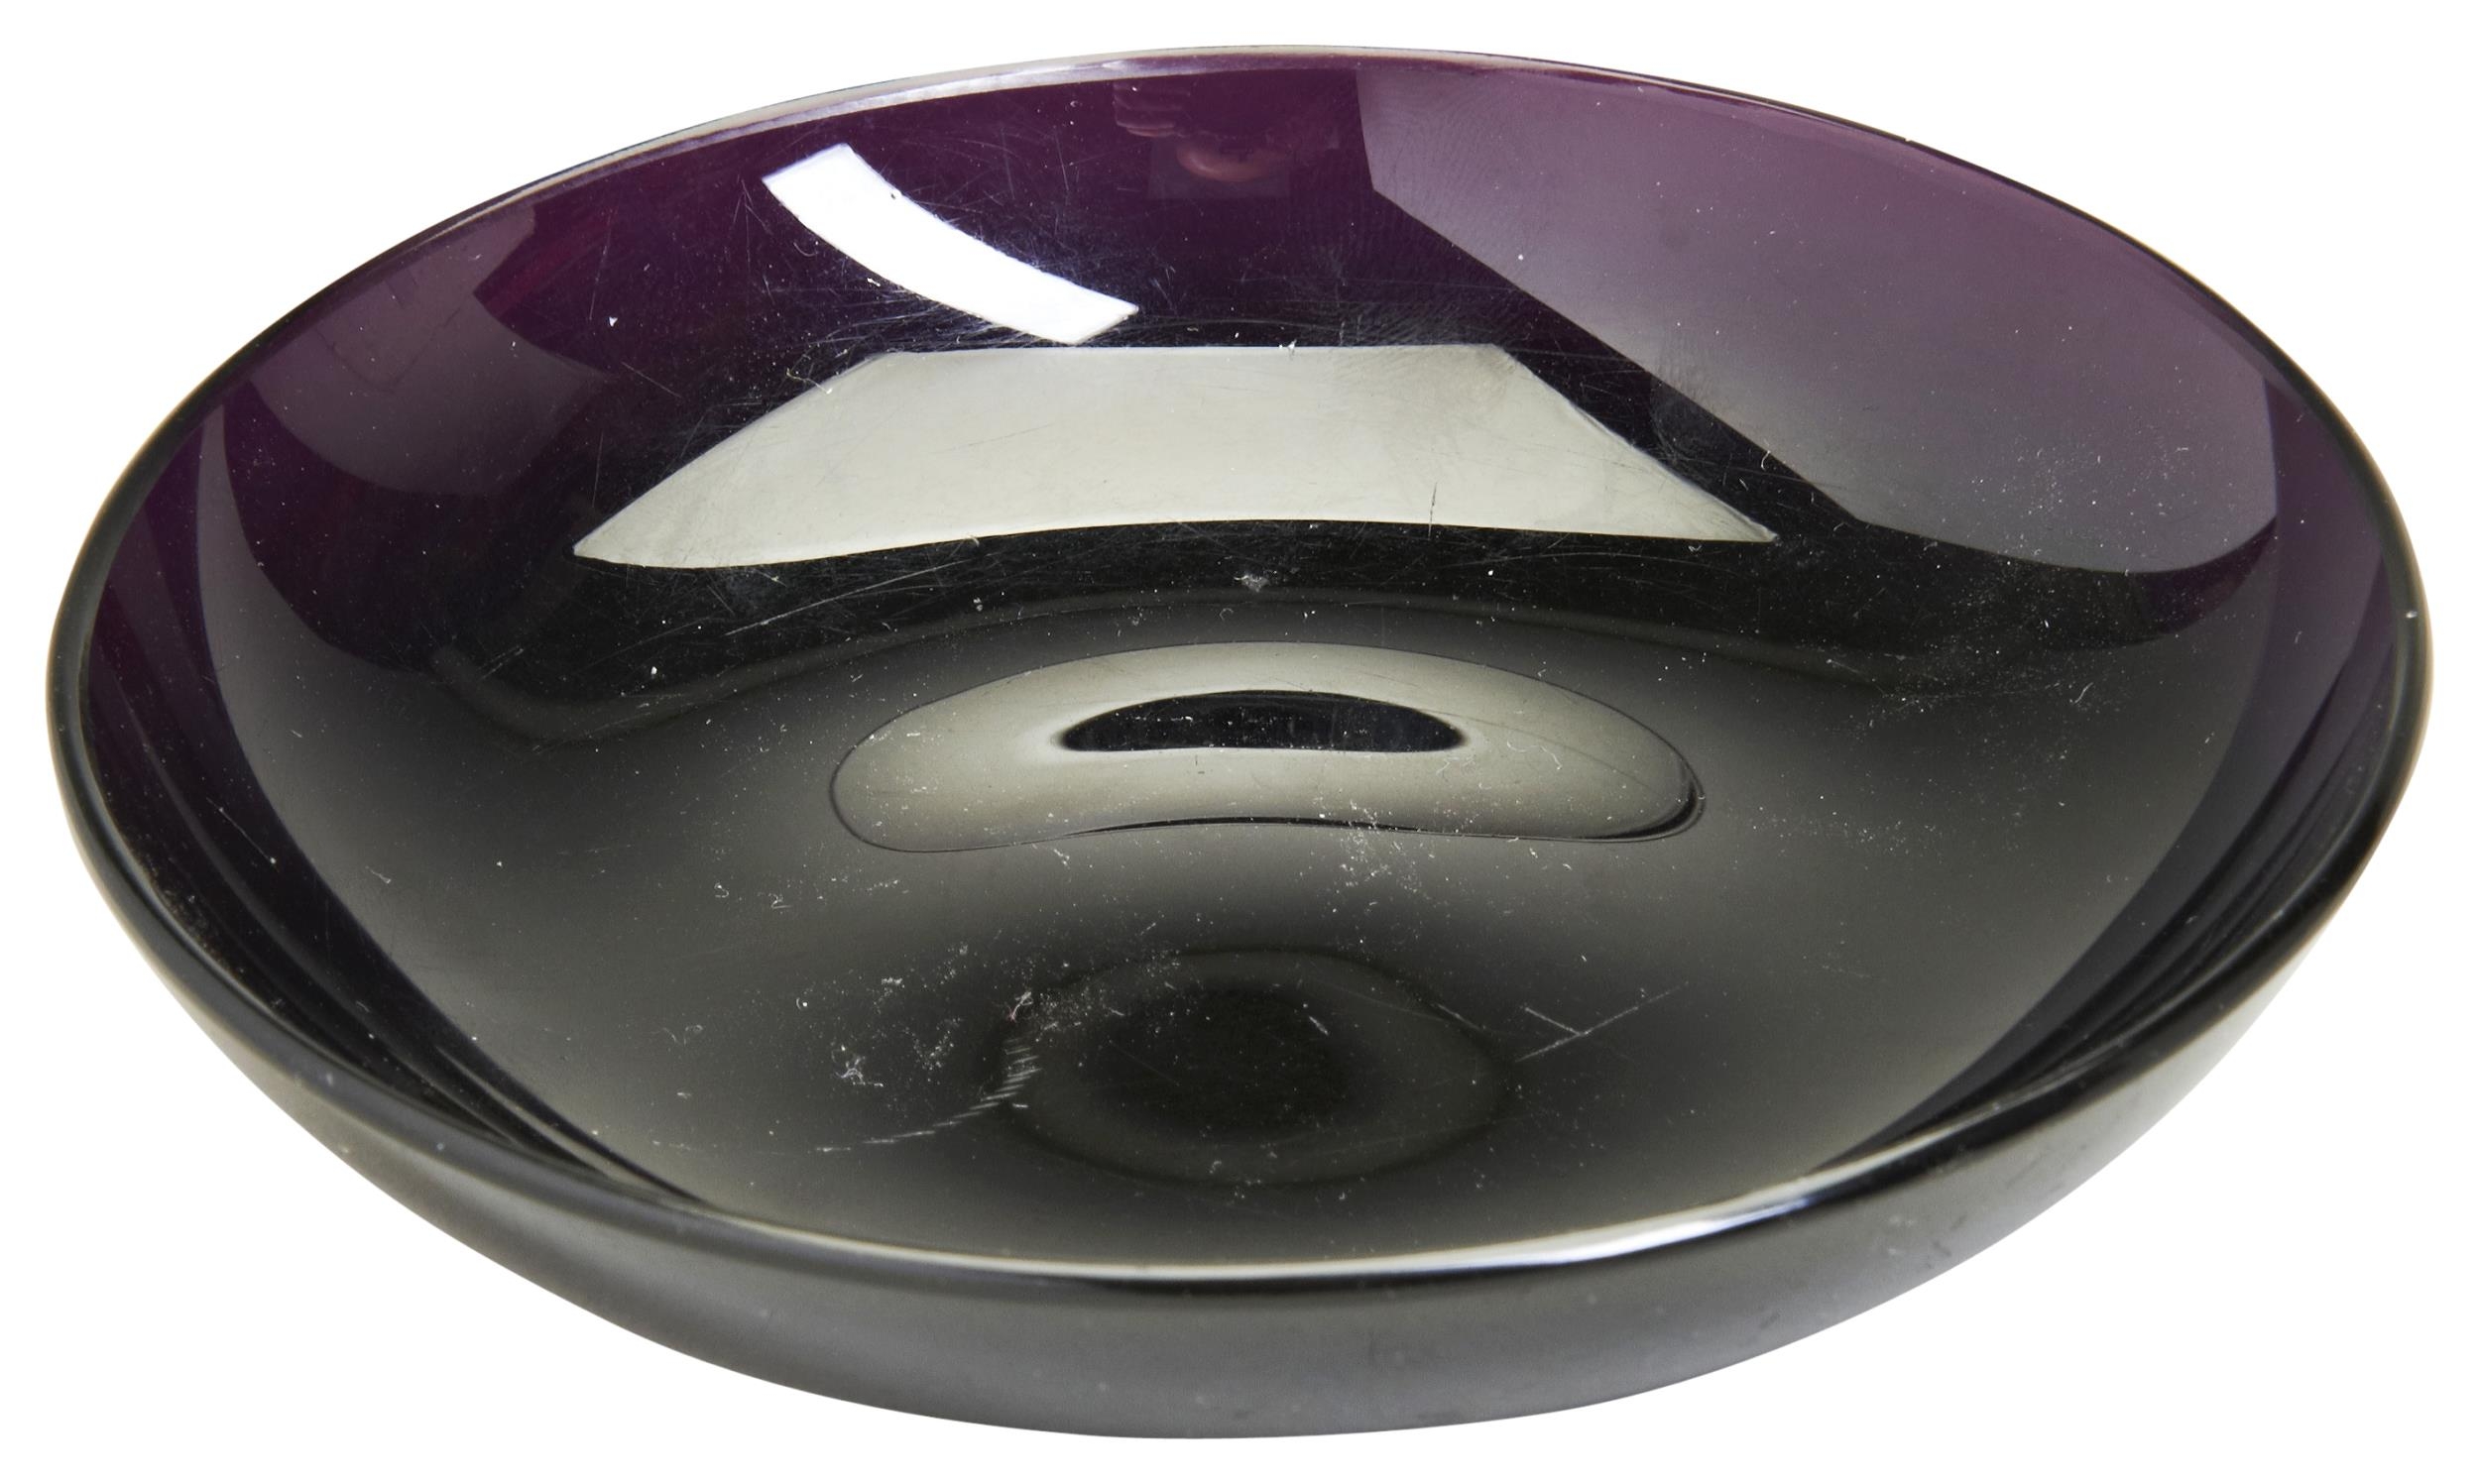 A SMALL CHINESE PURPLE GLASS BOWL QING DYNASTY, 19TH CENTURY a translucent shallow around purple